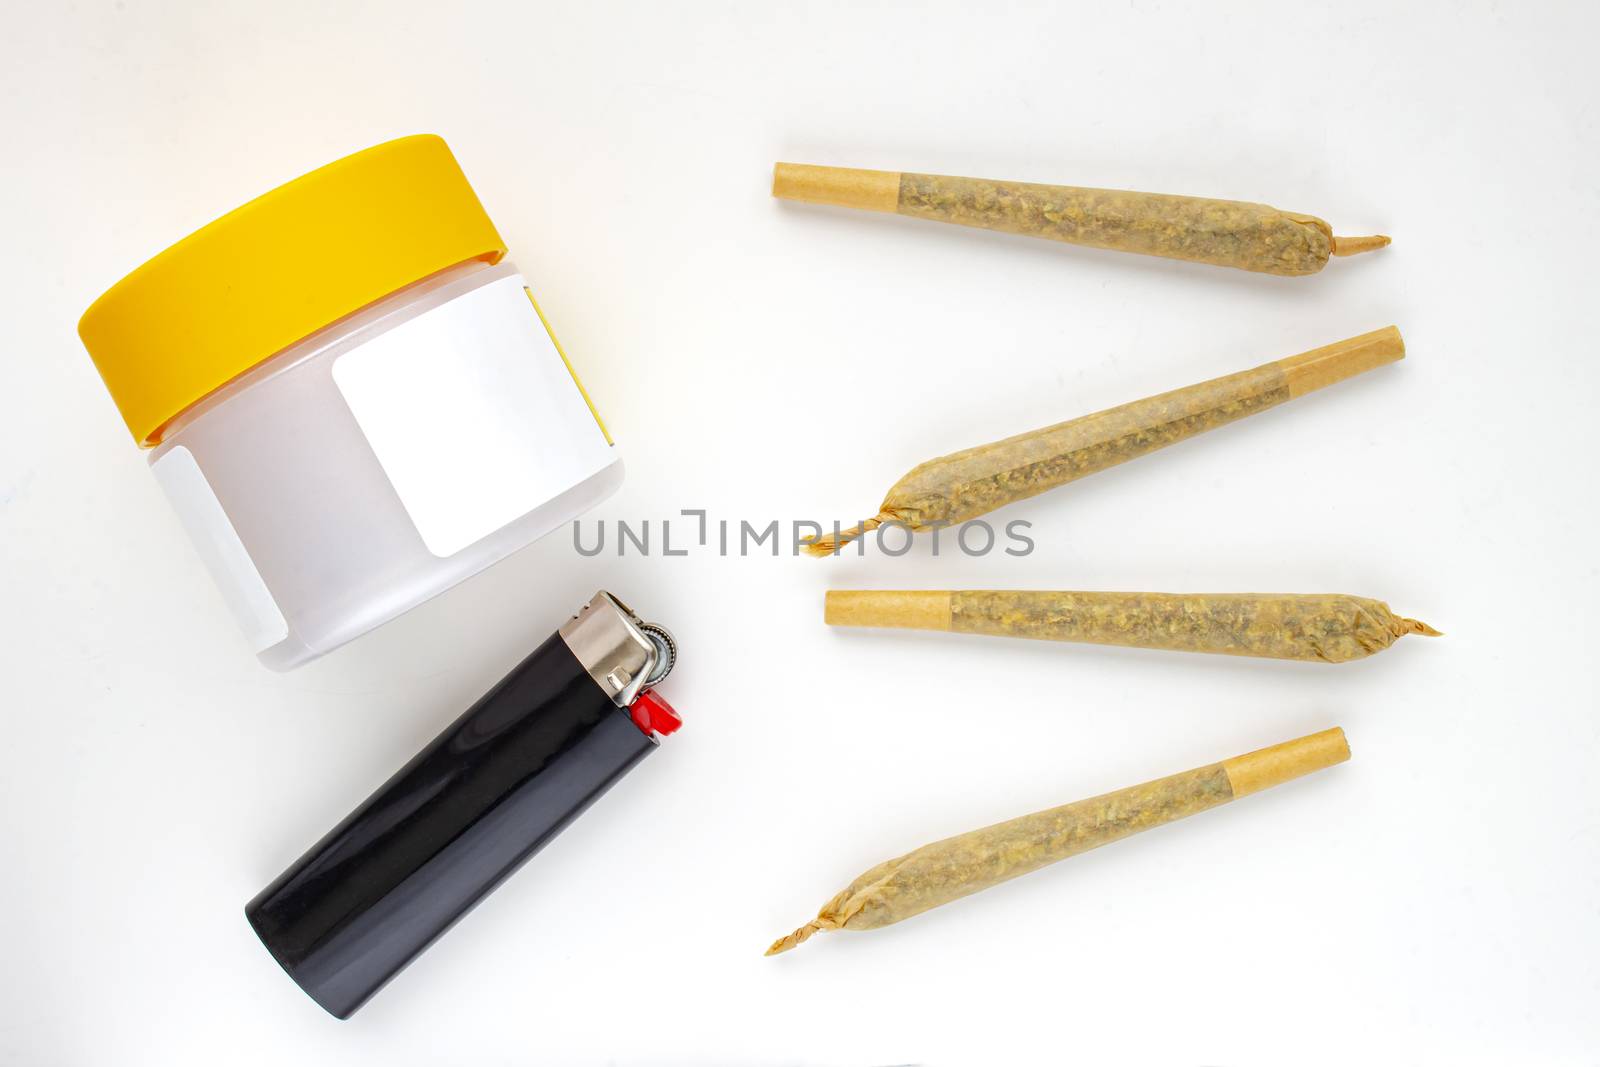 A Cannabis white and yellow plastic packaging container with Cigarettes, Prerolls or Joints and a lighter on a white background